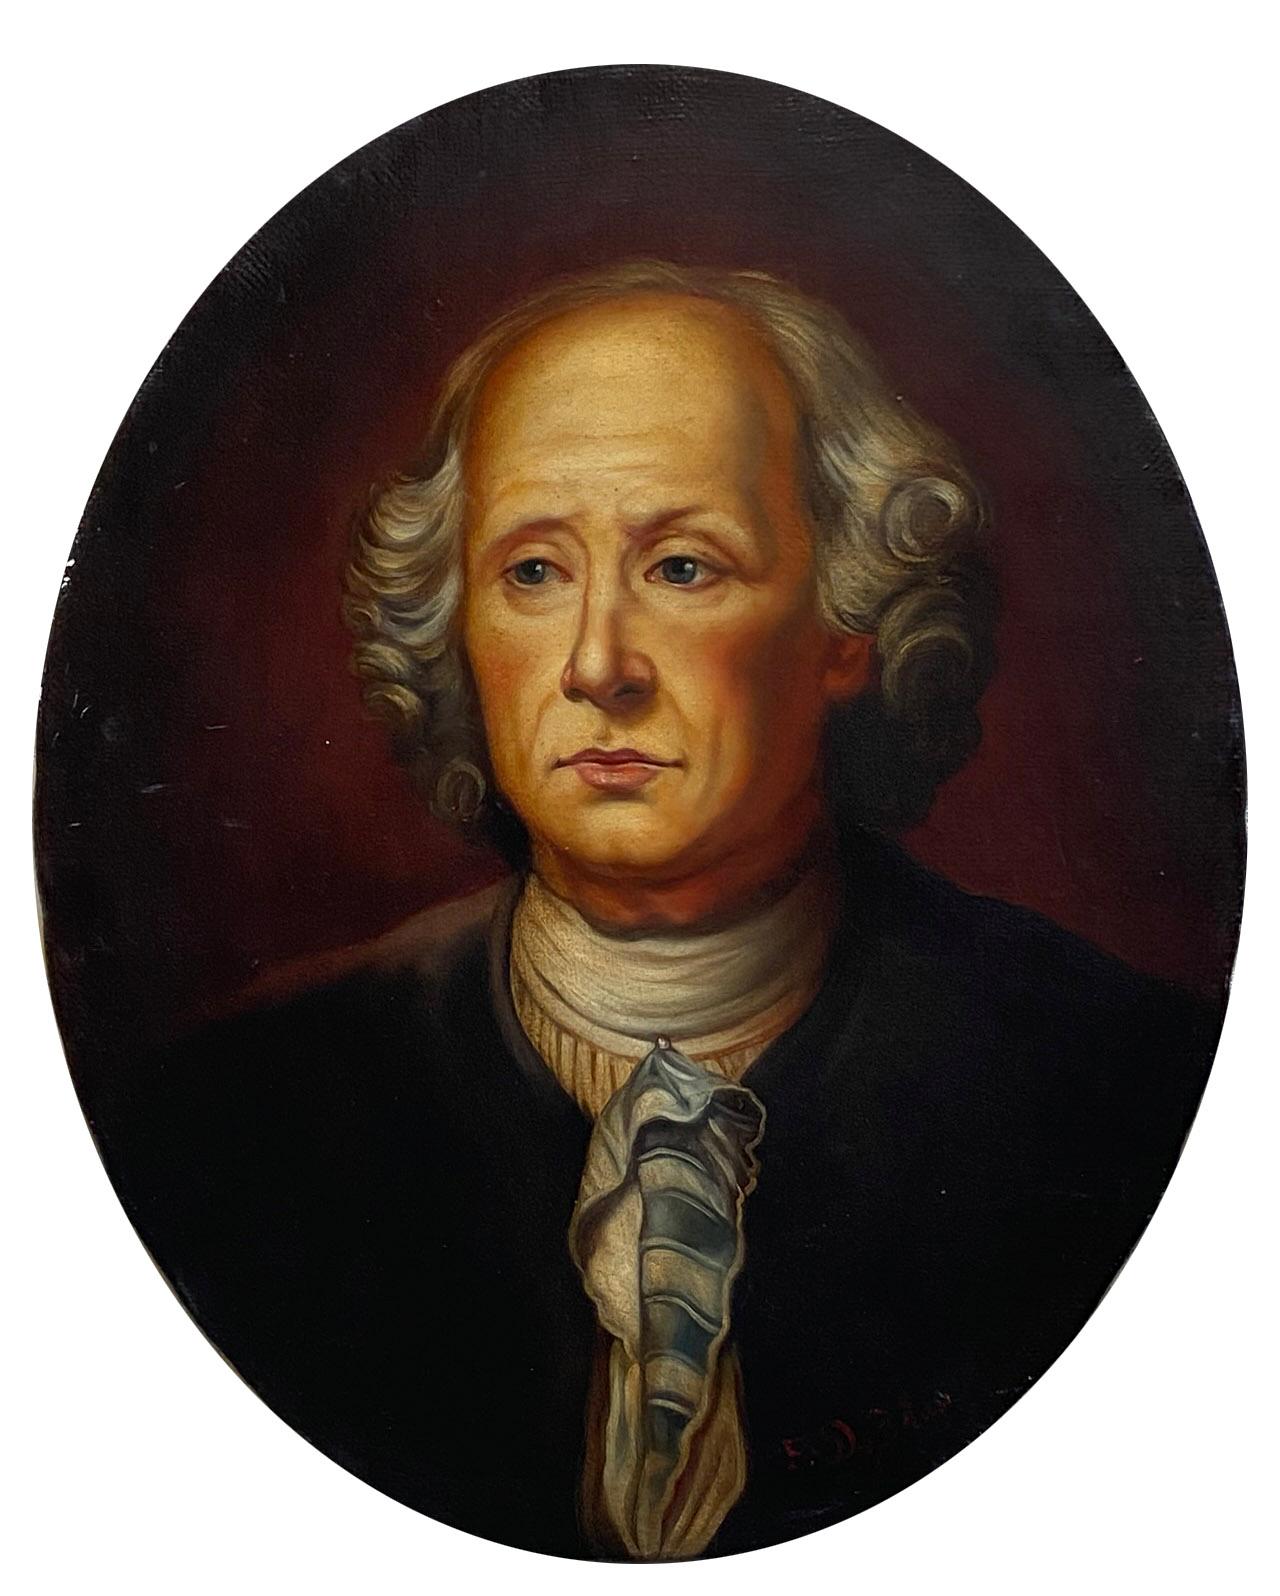 Portrait of a Gentlemen - Oval oil on canvas cm.50x40, Italia, 2006 Eugenio De Blasi 
Wooden frame available on request
The portrait of Eugenio De Blasi is inspired by one of the many portraits painted by Guillam Francois Colson, a French historian